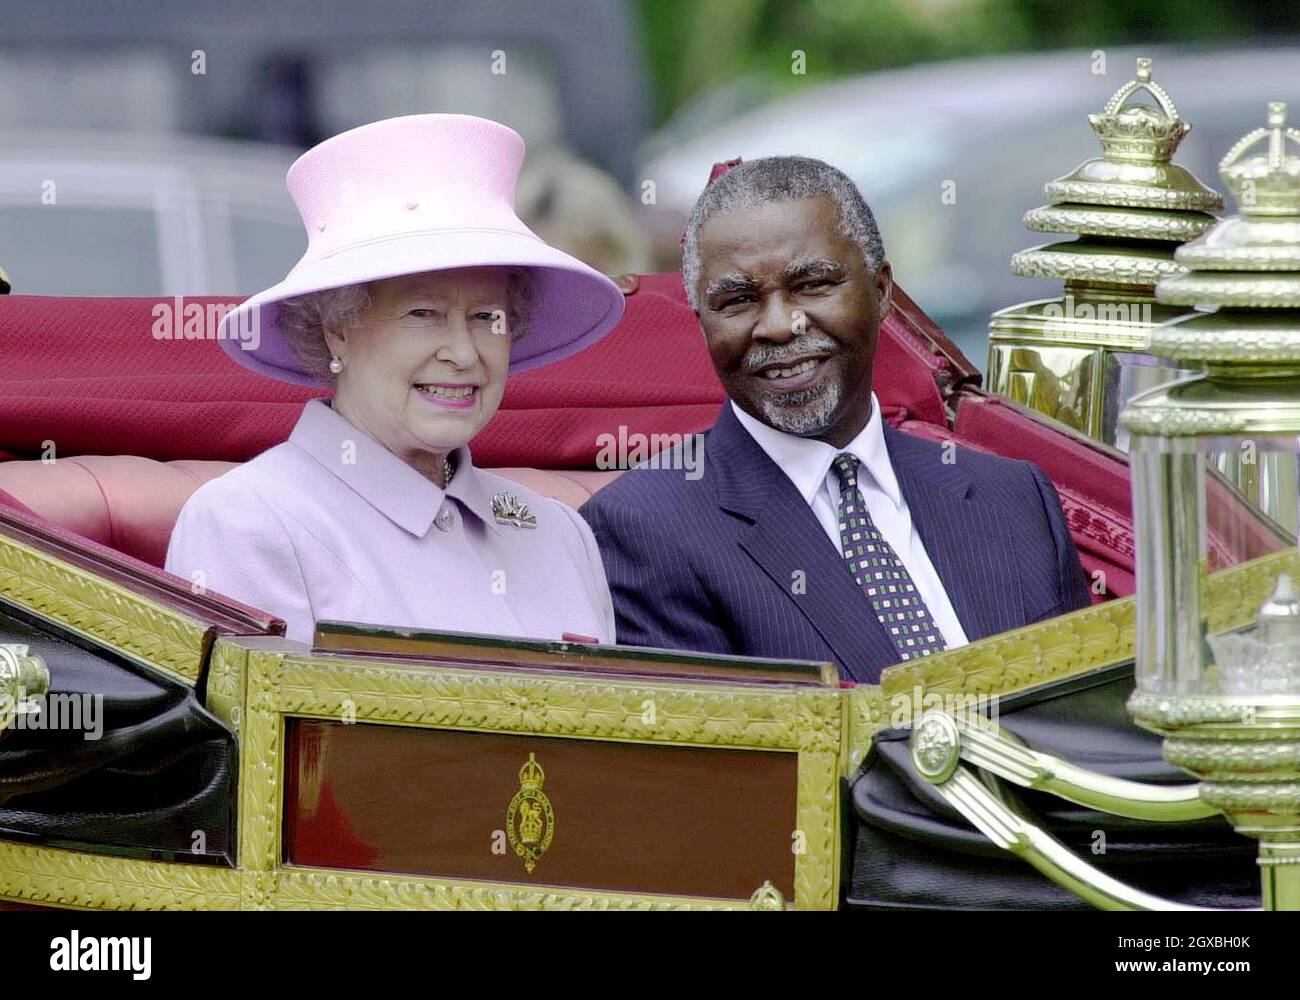 The Queen welcomes President Thabo Mbeki to Windsor at the start of the South African leader's state visit to Britain. The Queen and the President rode in an opened top carriage from Home Park to Windsor. The President was on a three day State visit. Â©Anwar Hussein/allactiondigital.com  Stock Photo